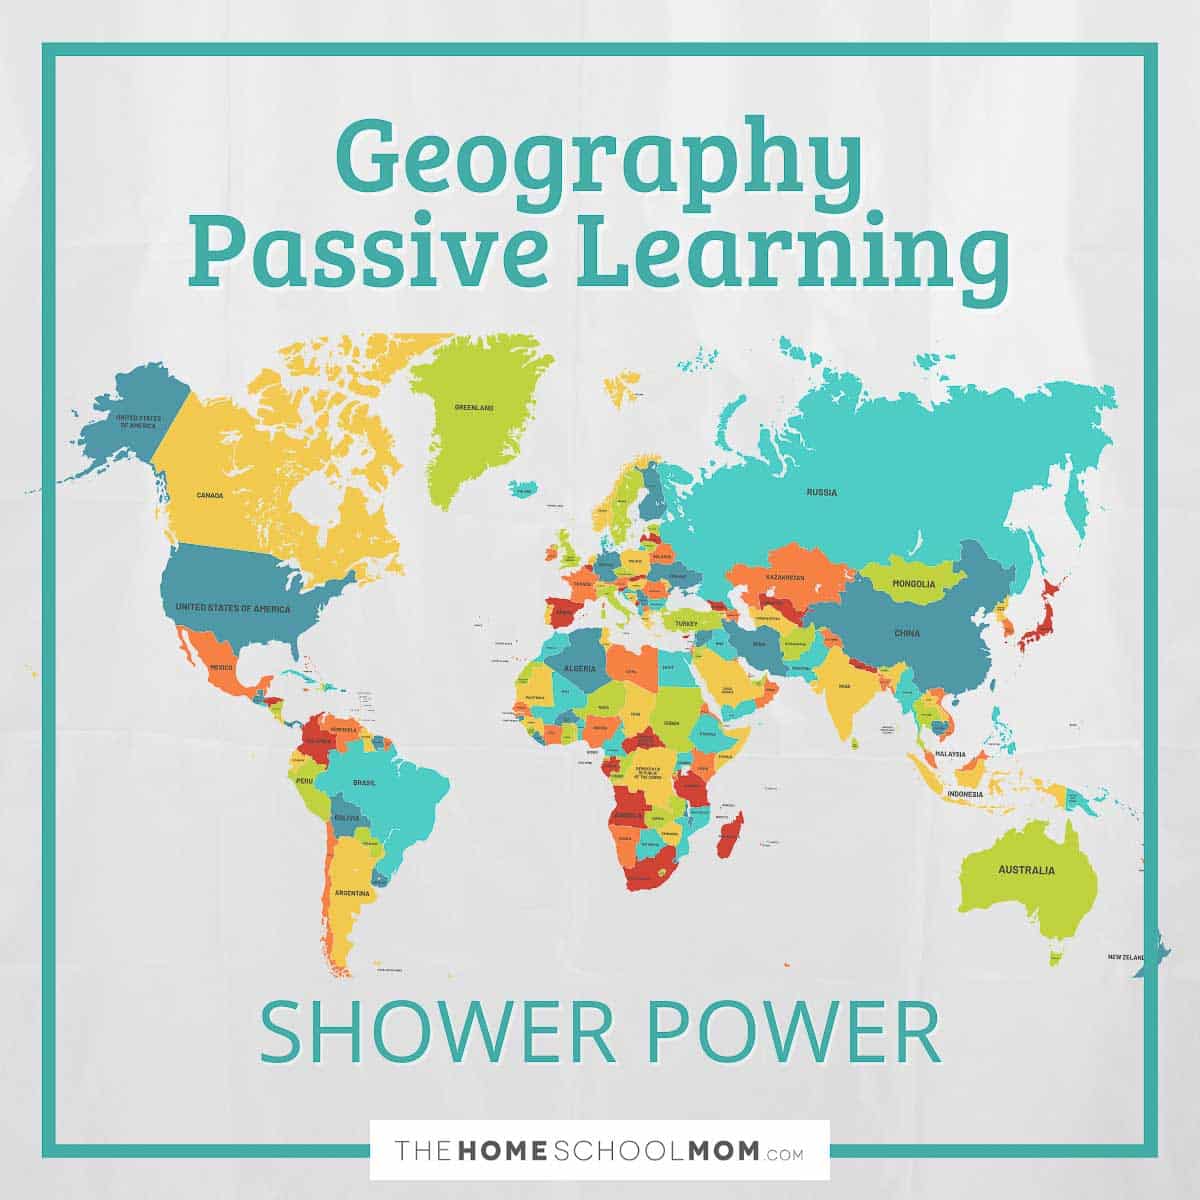 Geography passive learning: Shower power.